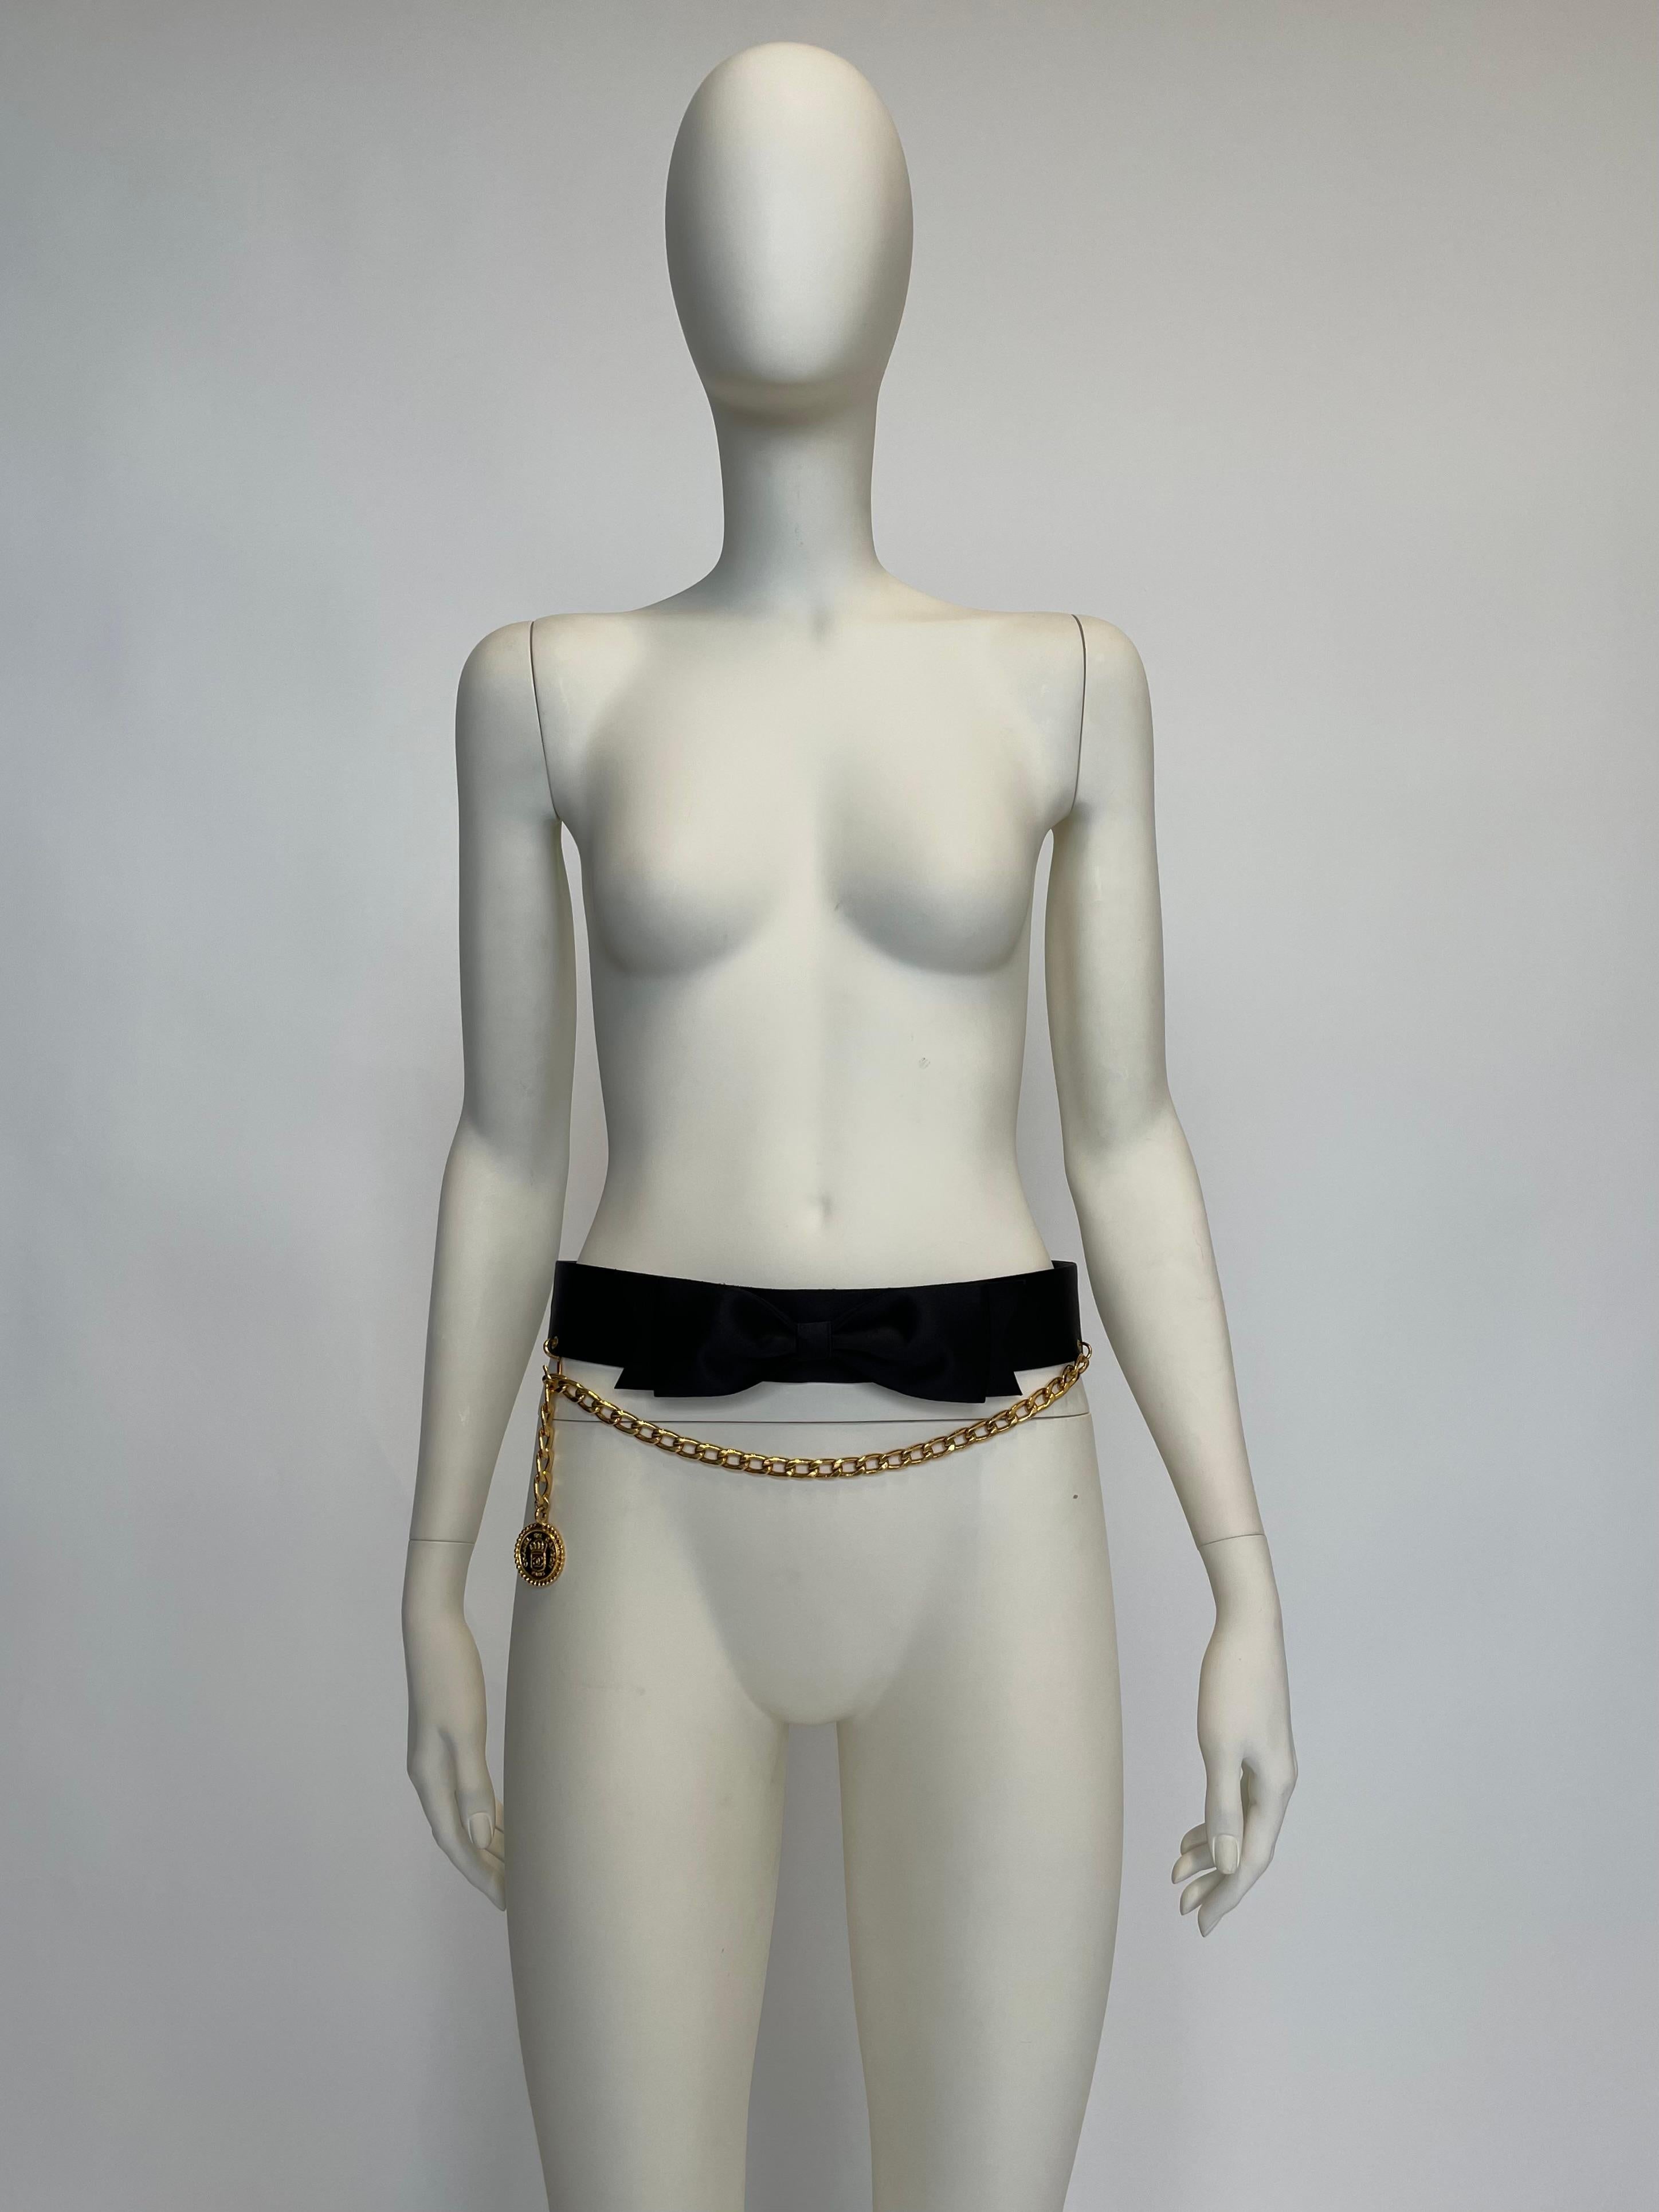 A fantastic “noughties” Chanel piece, this timeless waist belt will instantly elevate any outfit, for example by cinching the waist of an oversized blazer or dress. Crafted from black silk and smooth leatherette with gold-tone link chain and